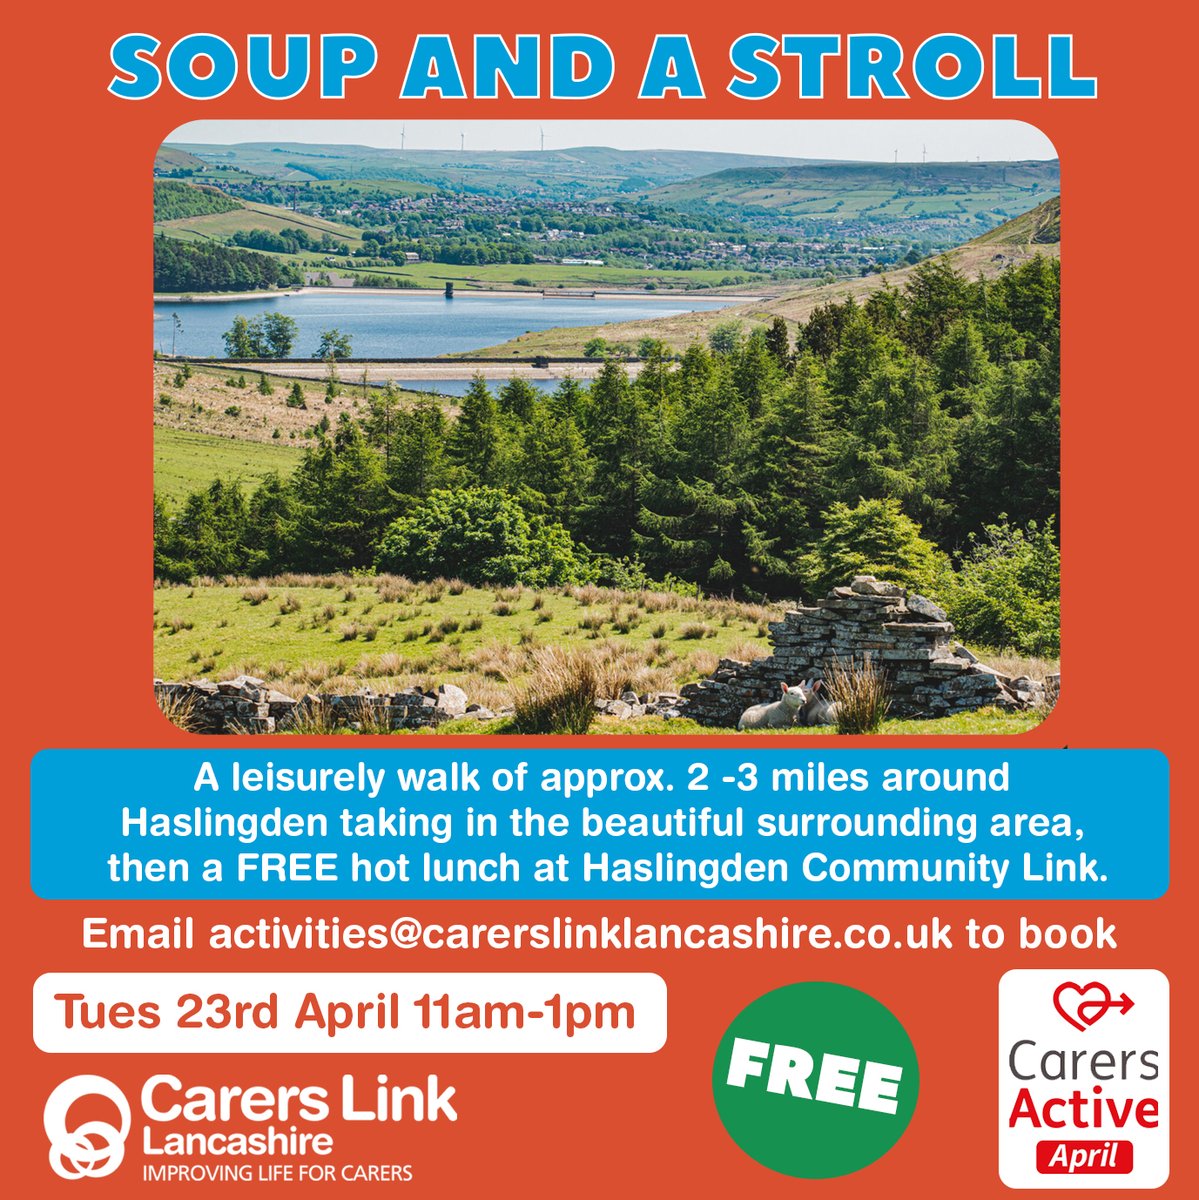 Join us, as part of Carers Active April, for a FREE Soup and a Stroll in Haslingden next week! Natter with other carers and our staff, take in the scenery, and finish with free soup at Community Link! Email us at activities@carerslinklancashire.co.uk to book your place.